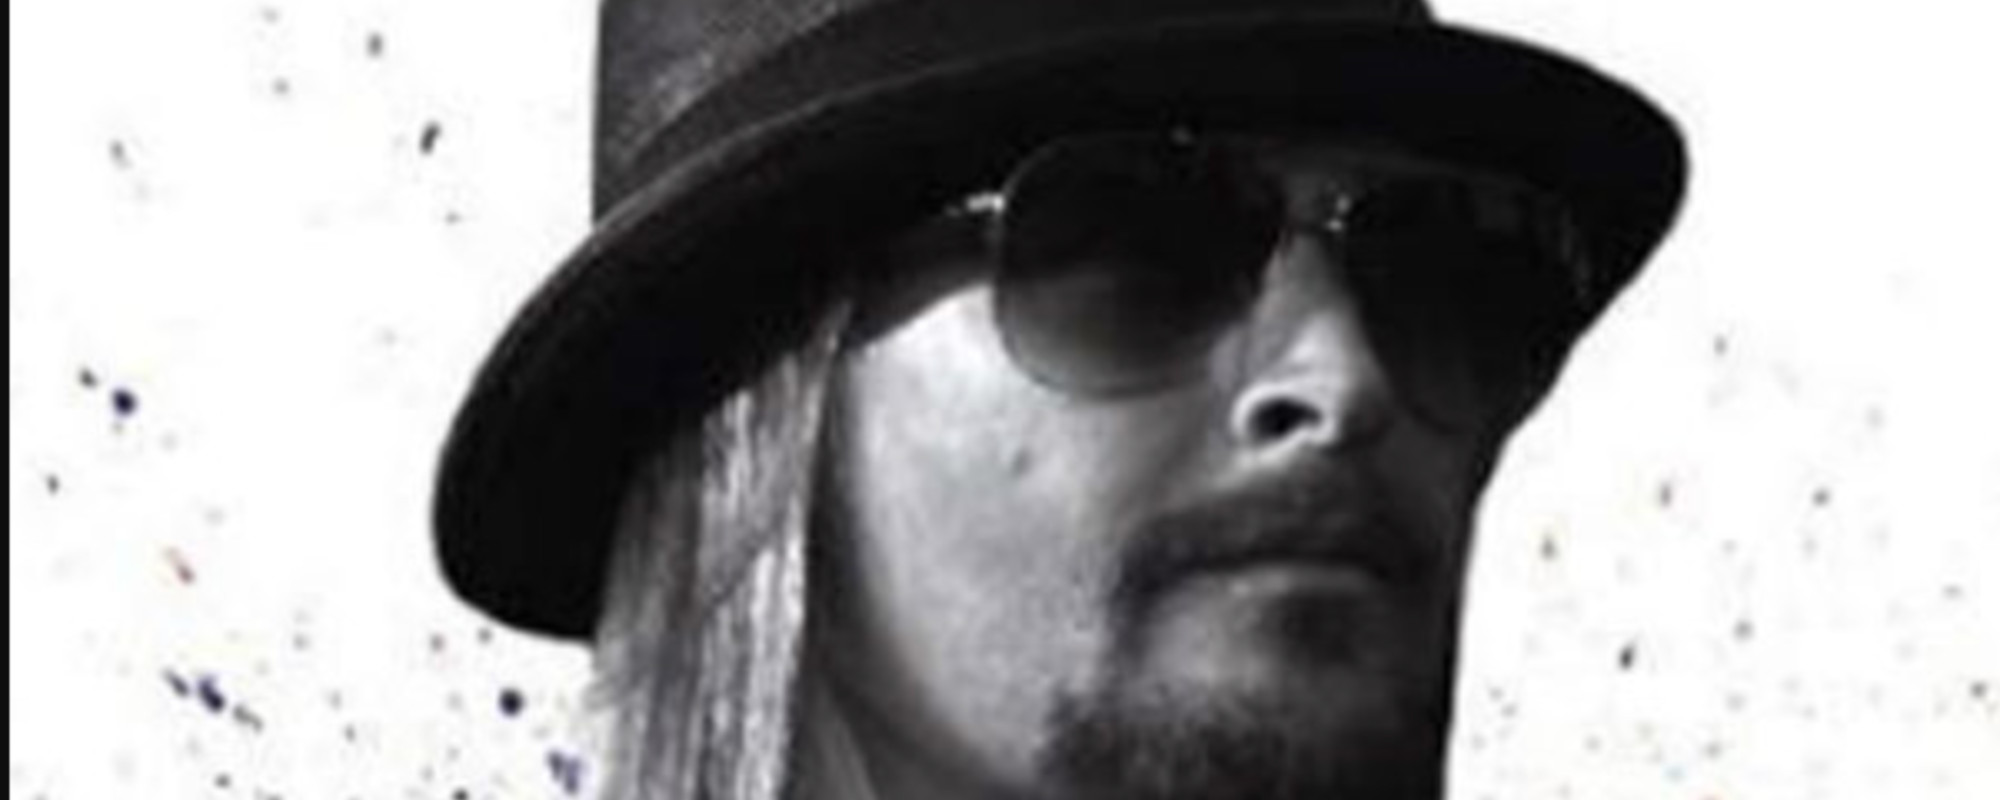 Kid Rock’s Tour Kicks Off With Video Message from Donald Trump